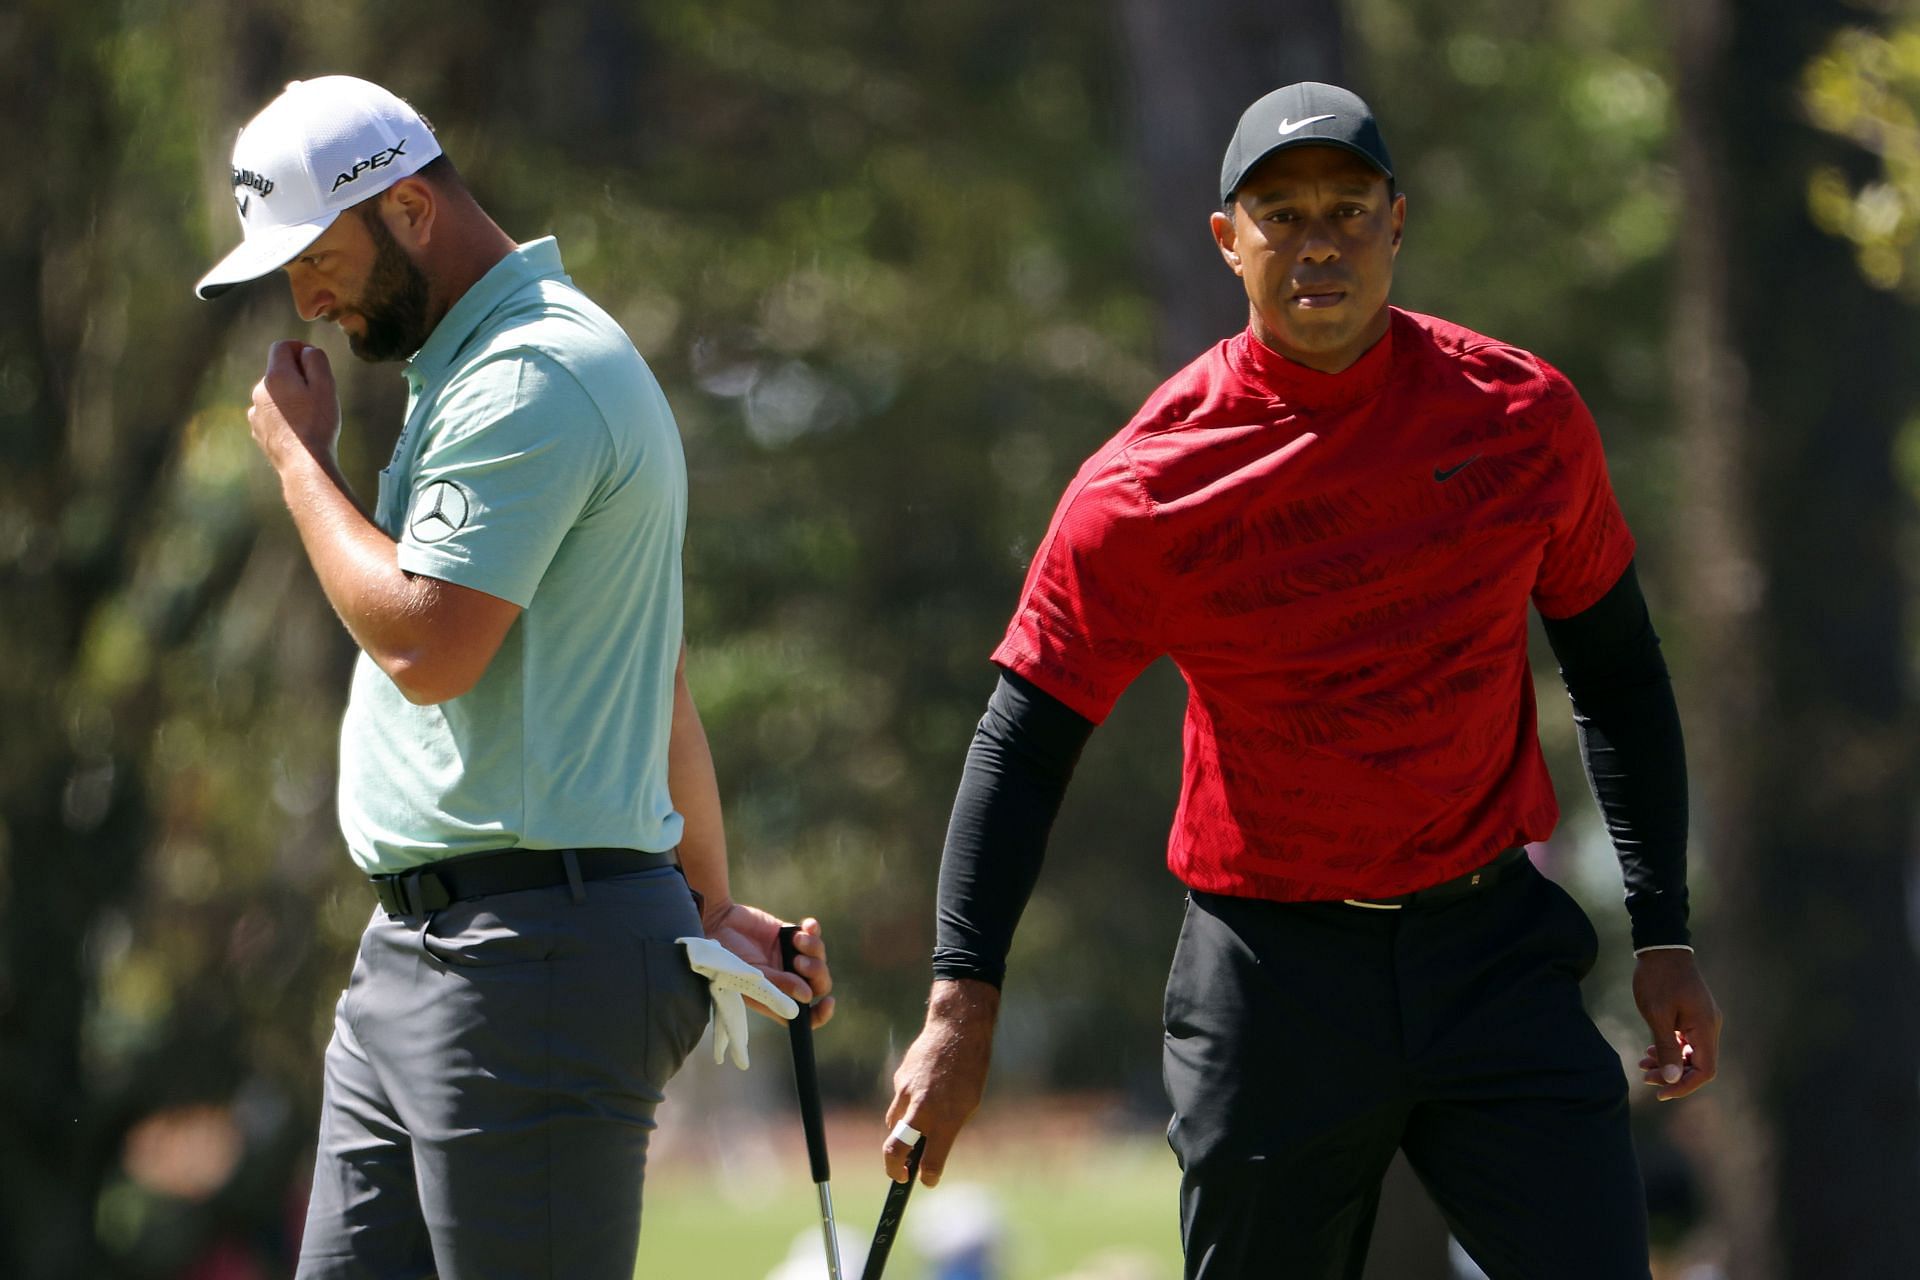 Jon Rahm and Tiger Woods at The Masters - Final Round (Image via Jamie Squire/Getty Images)